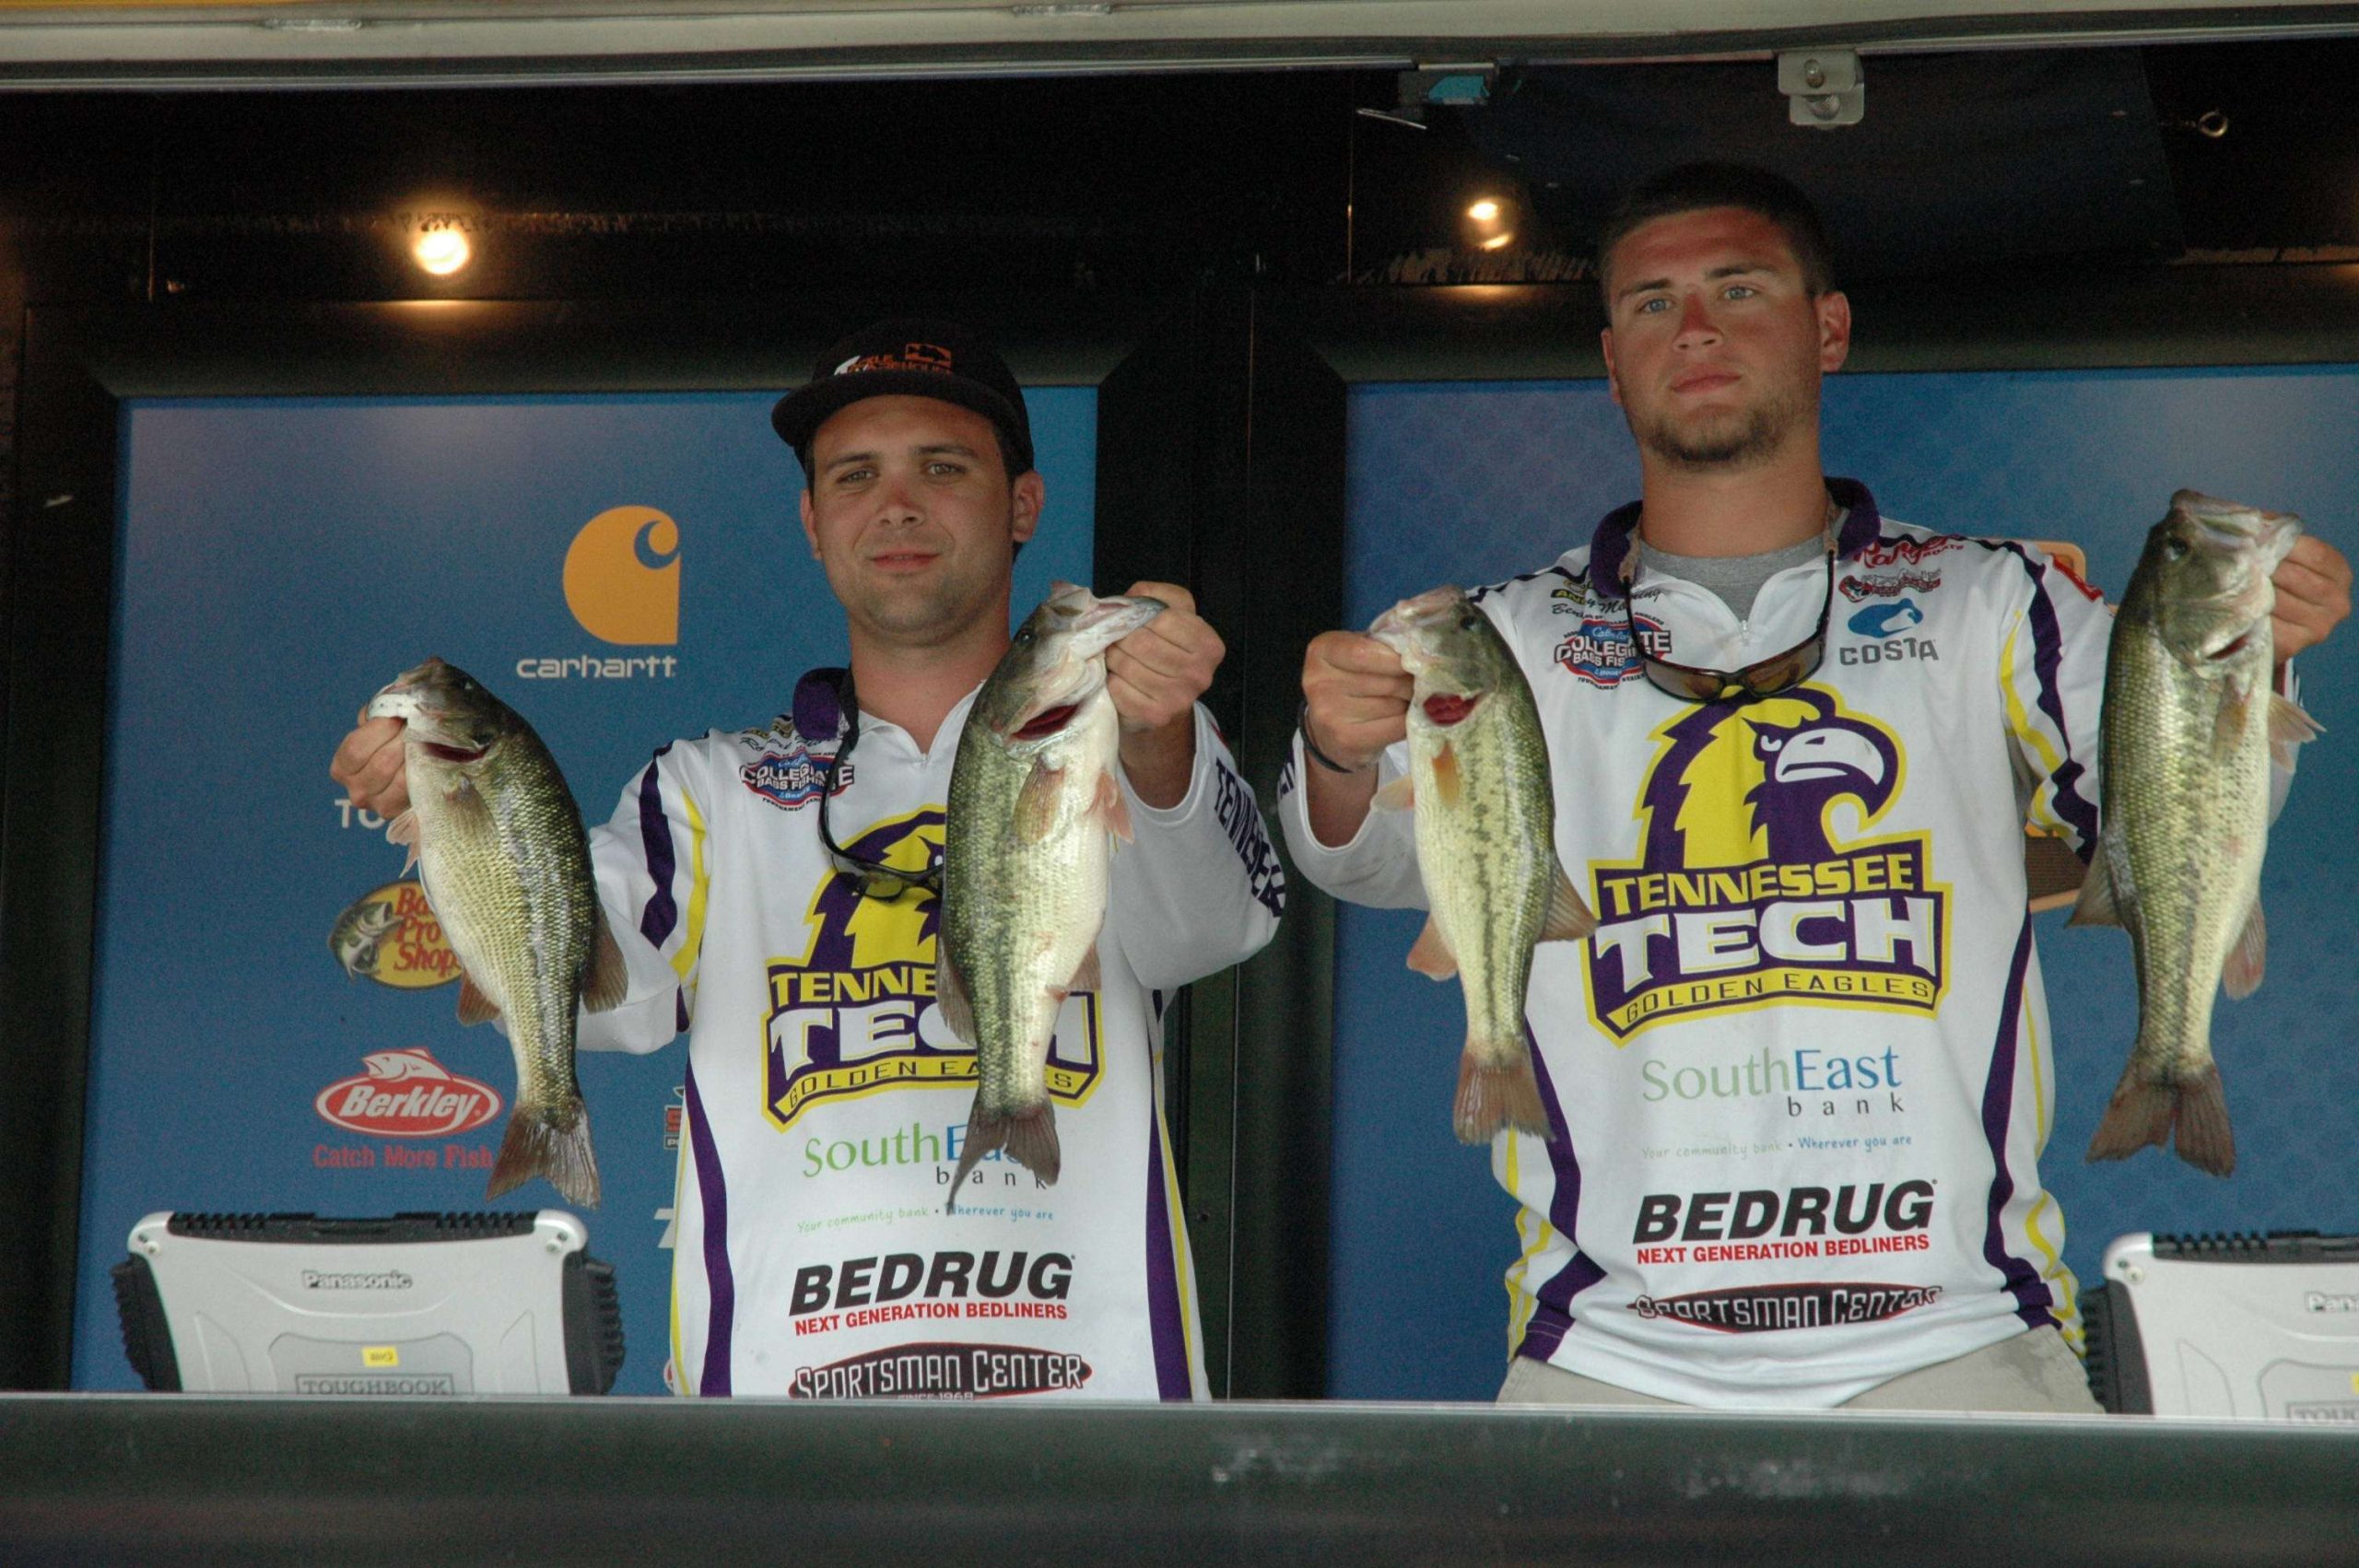 Robert Giarla and Bentley Manning, from Tennessee Tech, are in ninth place after Day 1 with 12-9. 